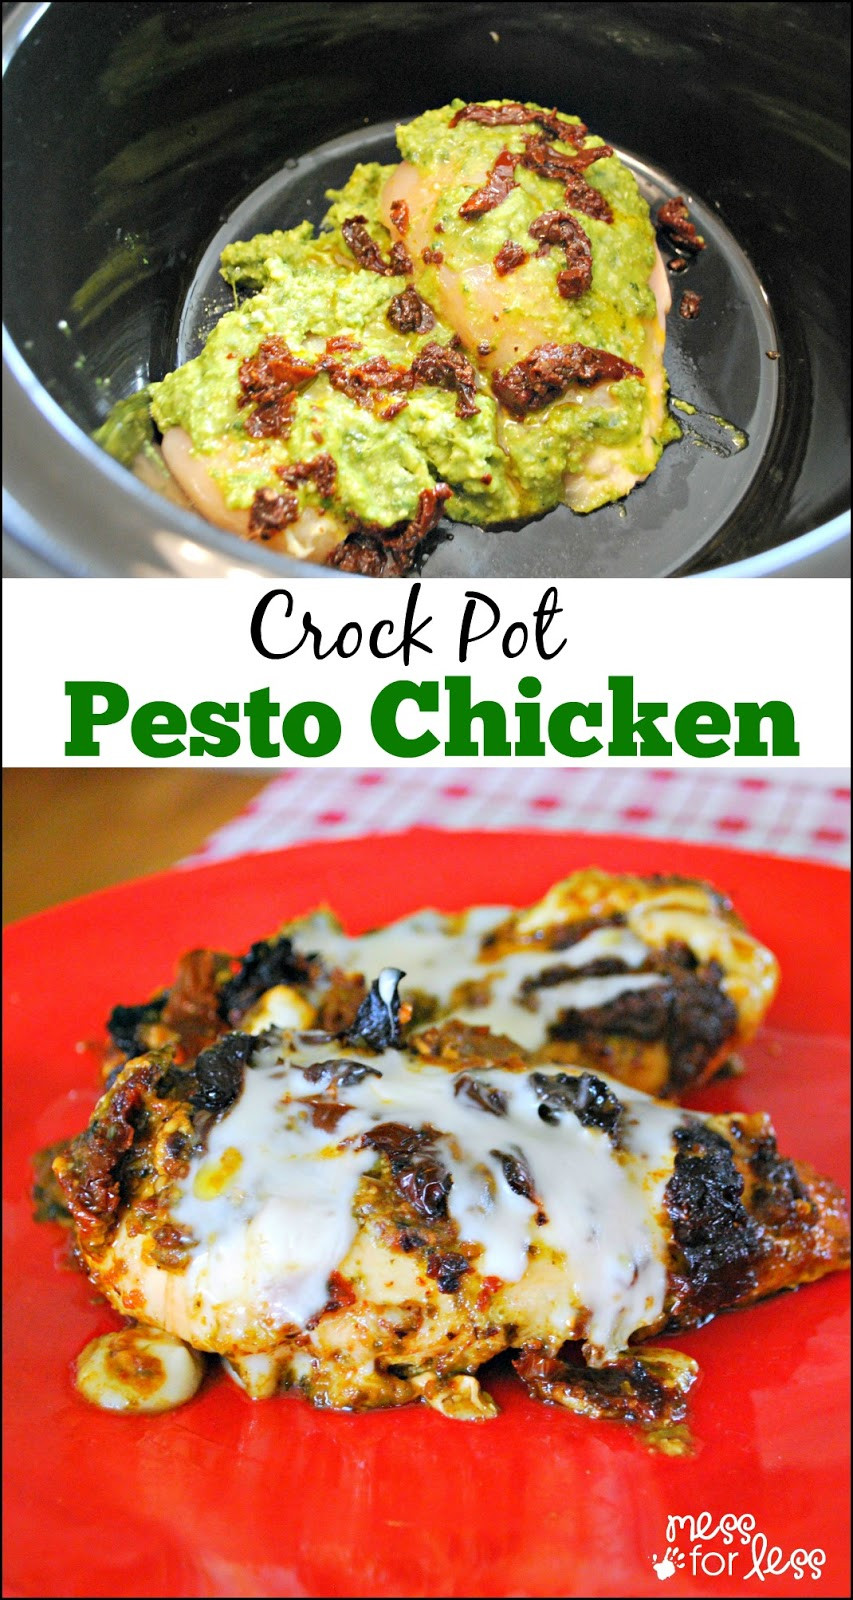 Chicken Crockpot Recipes For Kids
 Easy Crock Pot Recipes Chicken with Pesto and Sun Dried